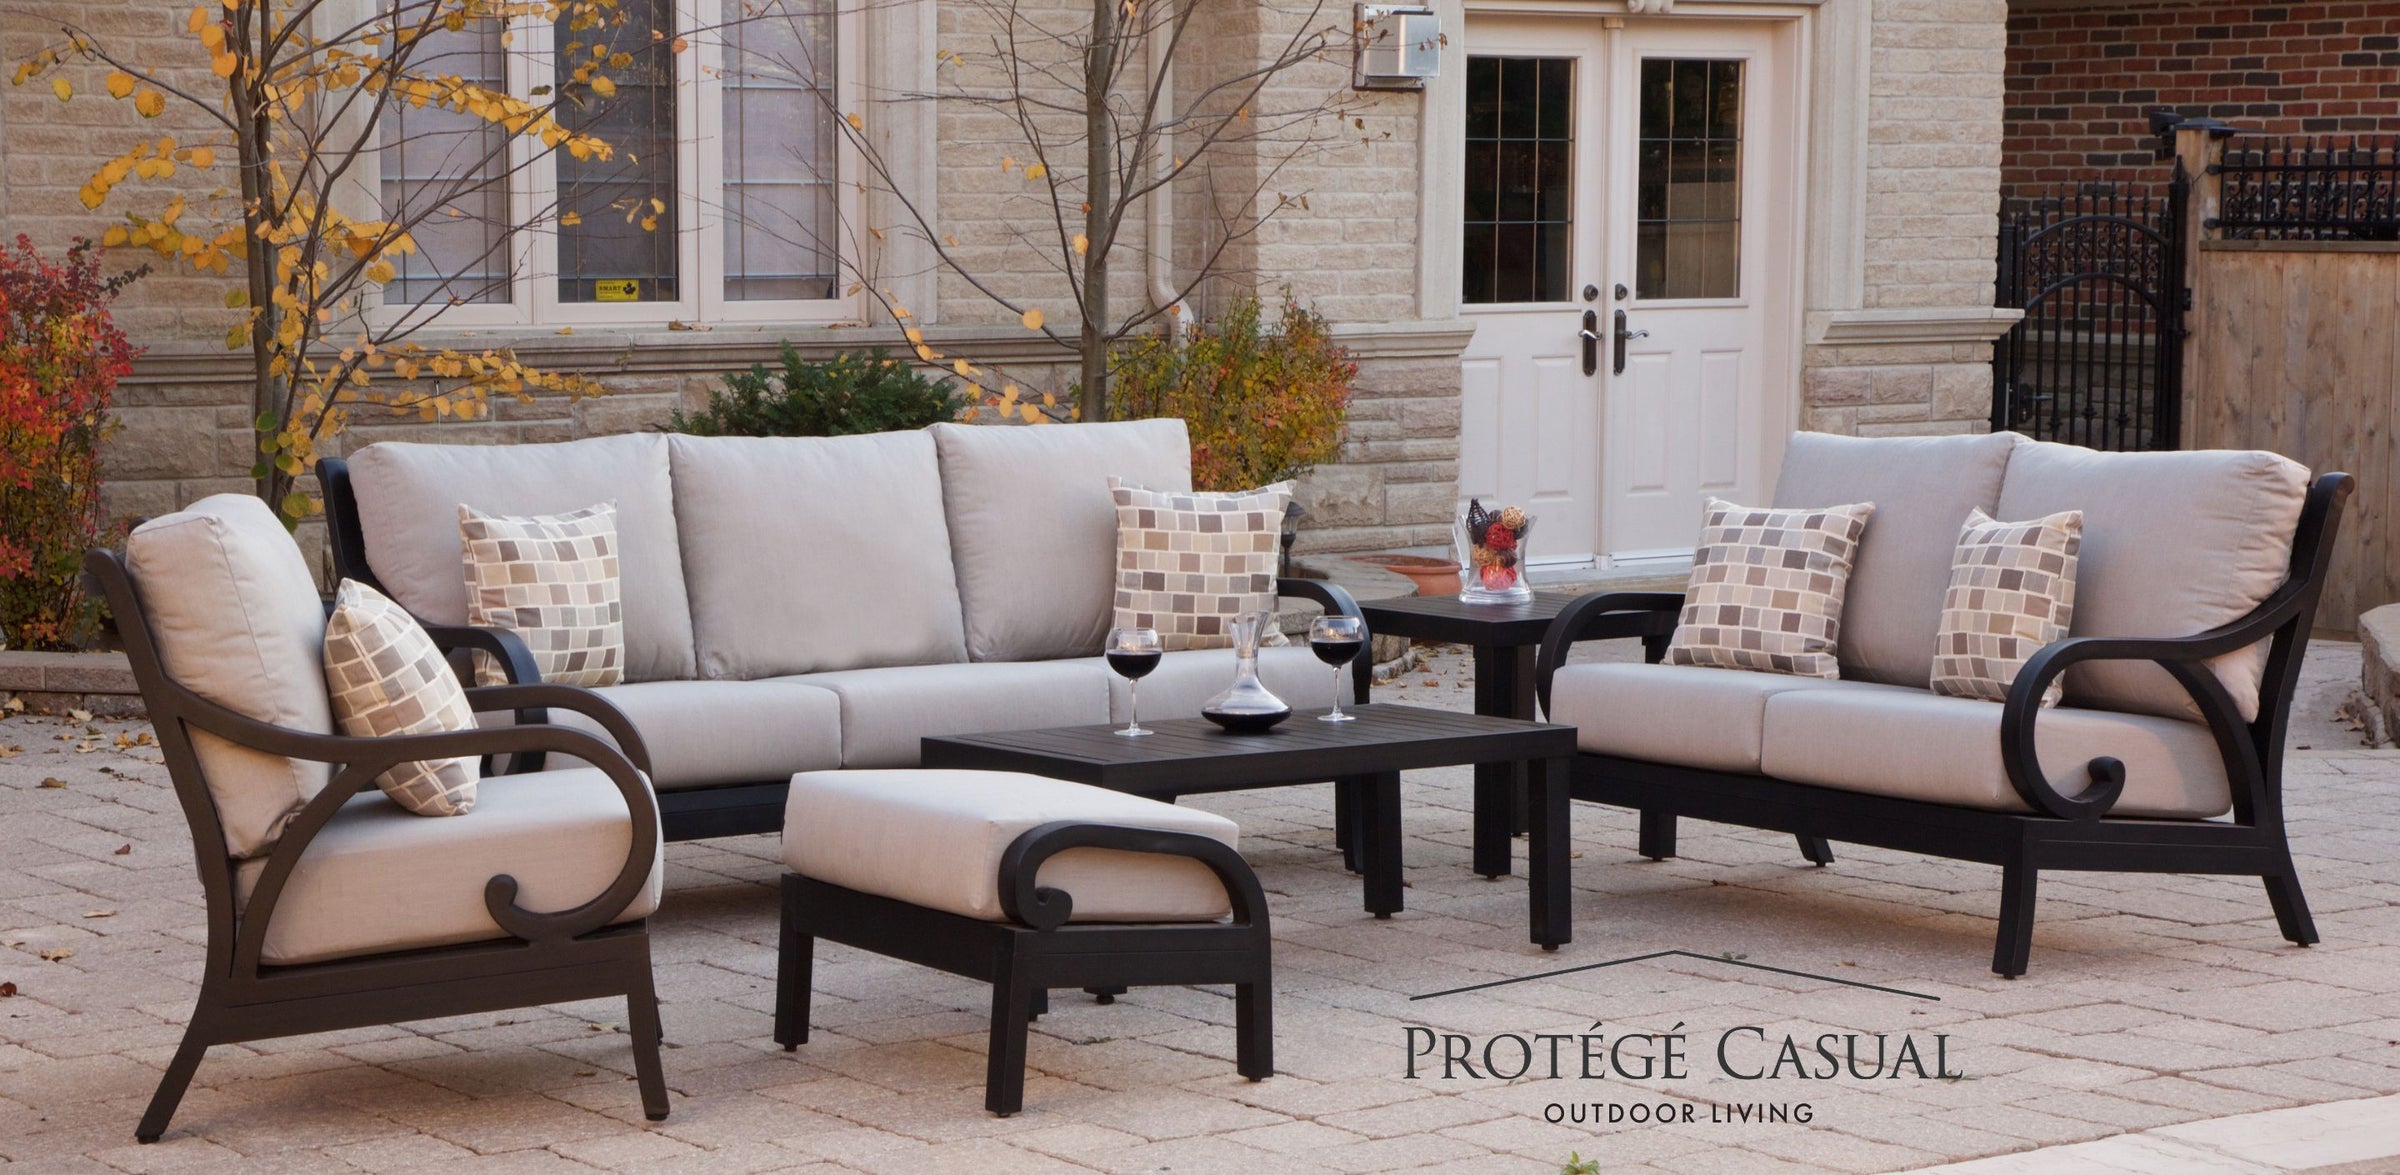 Protege Casual Outdoor Furniture